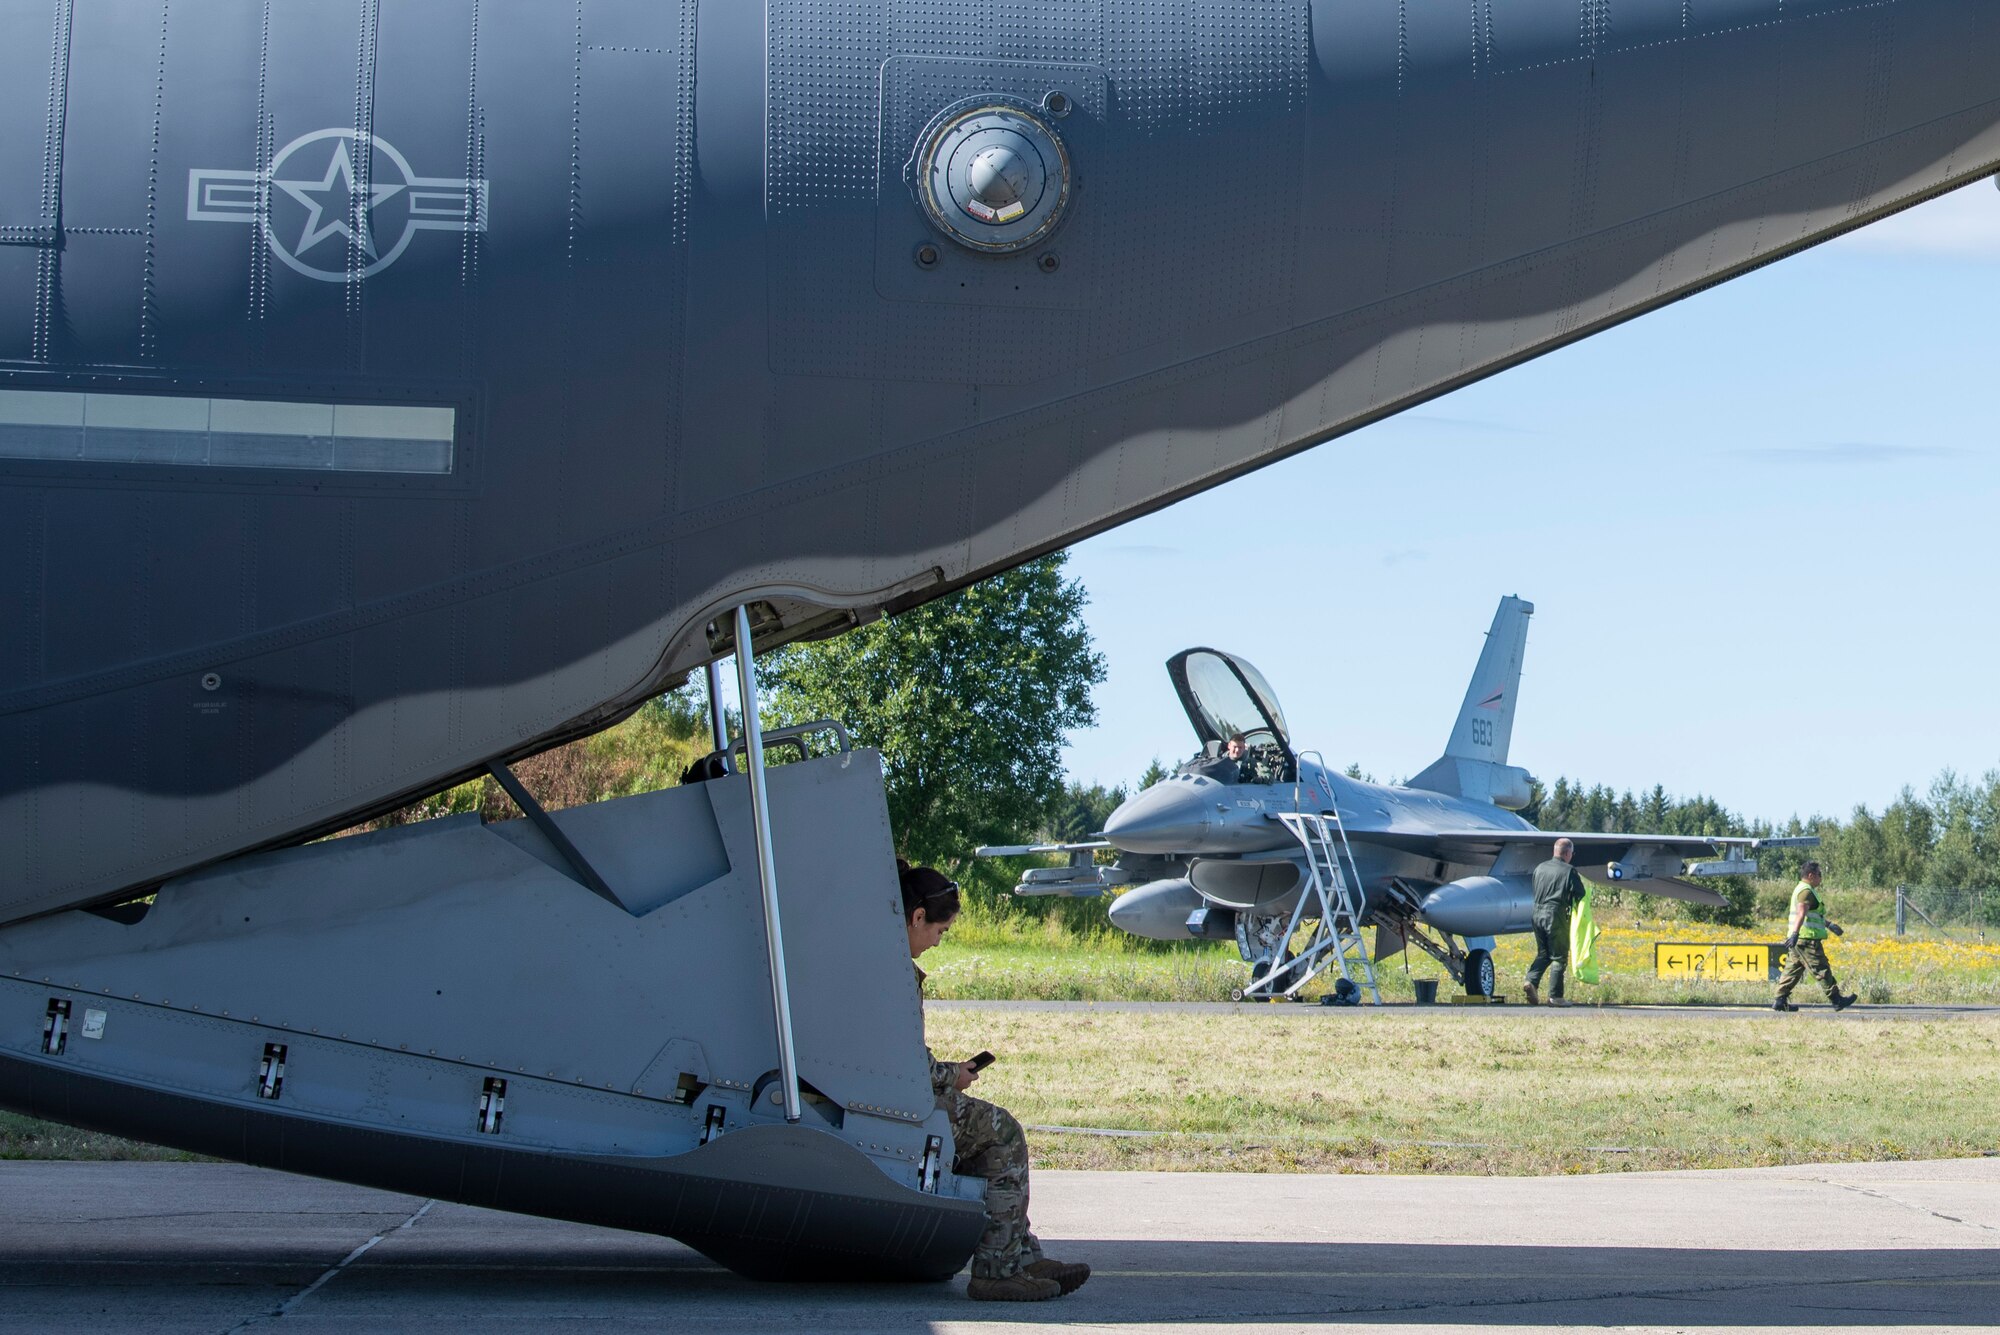 An Airman with the 352d Special Operations Aircraft Maintenance Squadron sits on the back ramp of an MC-130J Commando II, based out of RAF Mildenhall, U.K., as a Royal Norwegian Air Force pilot prepares to depart his F-16 Fighting Falcon during a training mission at Rygge Air Station, Norway, August 25, 2020. Integration with the Norwegian Air Force allowed the 352 SOW to enhance and strengthen bonds with our partner nation and further secure the strategic high-north region. The exercise provided training for 352d Special Operations Wing members on capabilities such as personnel recov-ery, forward area refueling point, aerial refueling, maritime craft delivery system, and fast rope training. (U.S. Air Force photo by Staff Sgt. Michael Washburn)